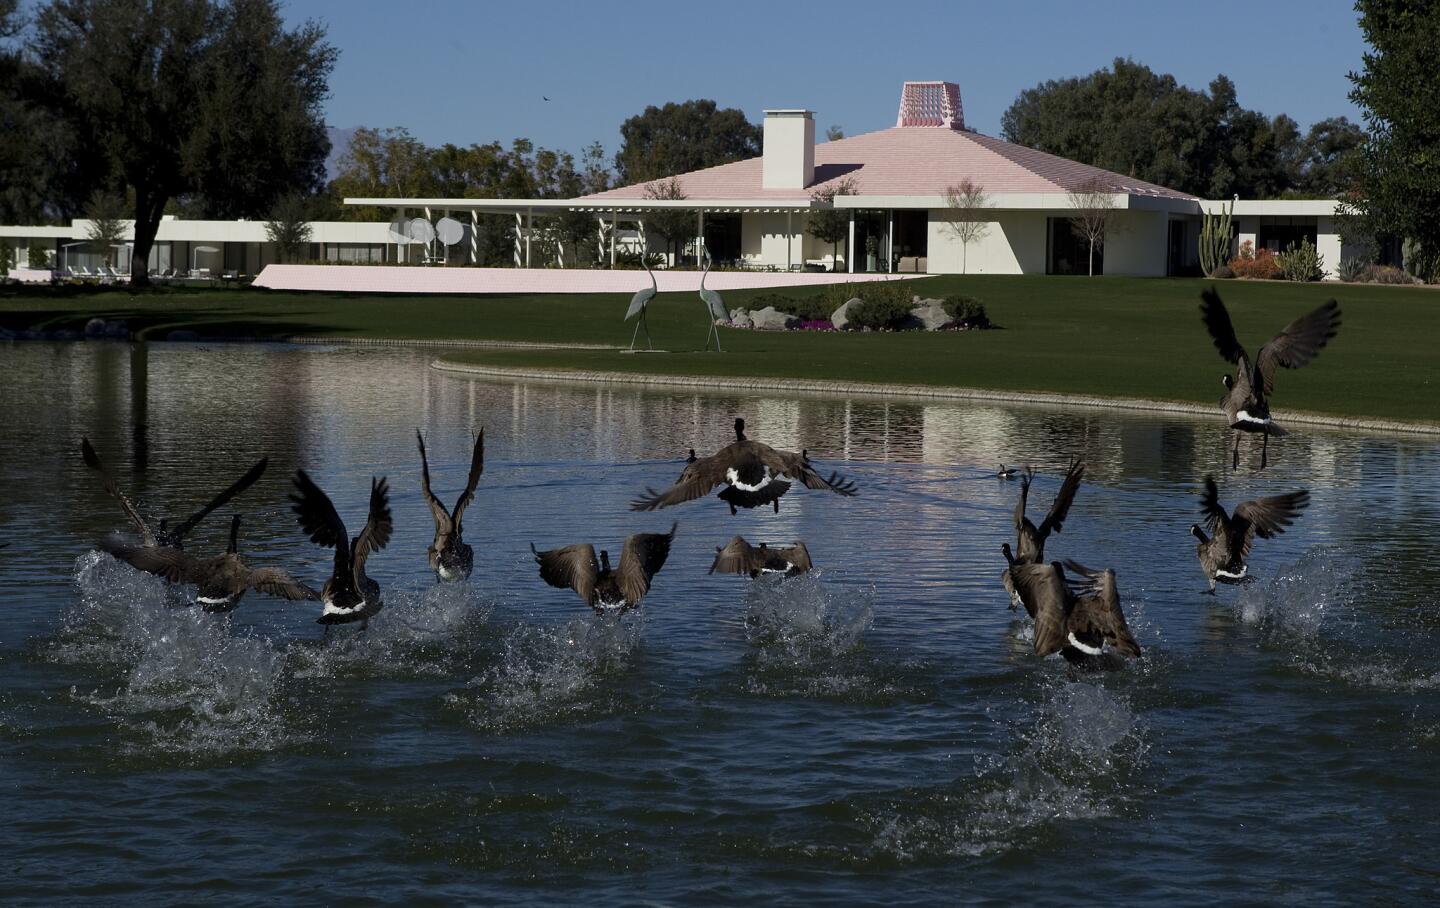 Sunnylands, the 200-acre Annenberg estate in Rancho Mirage that hosted five decades of political and Hollywood luminaries behind its pink walls, opened to the public for the first time in March of 2012.